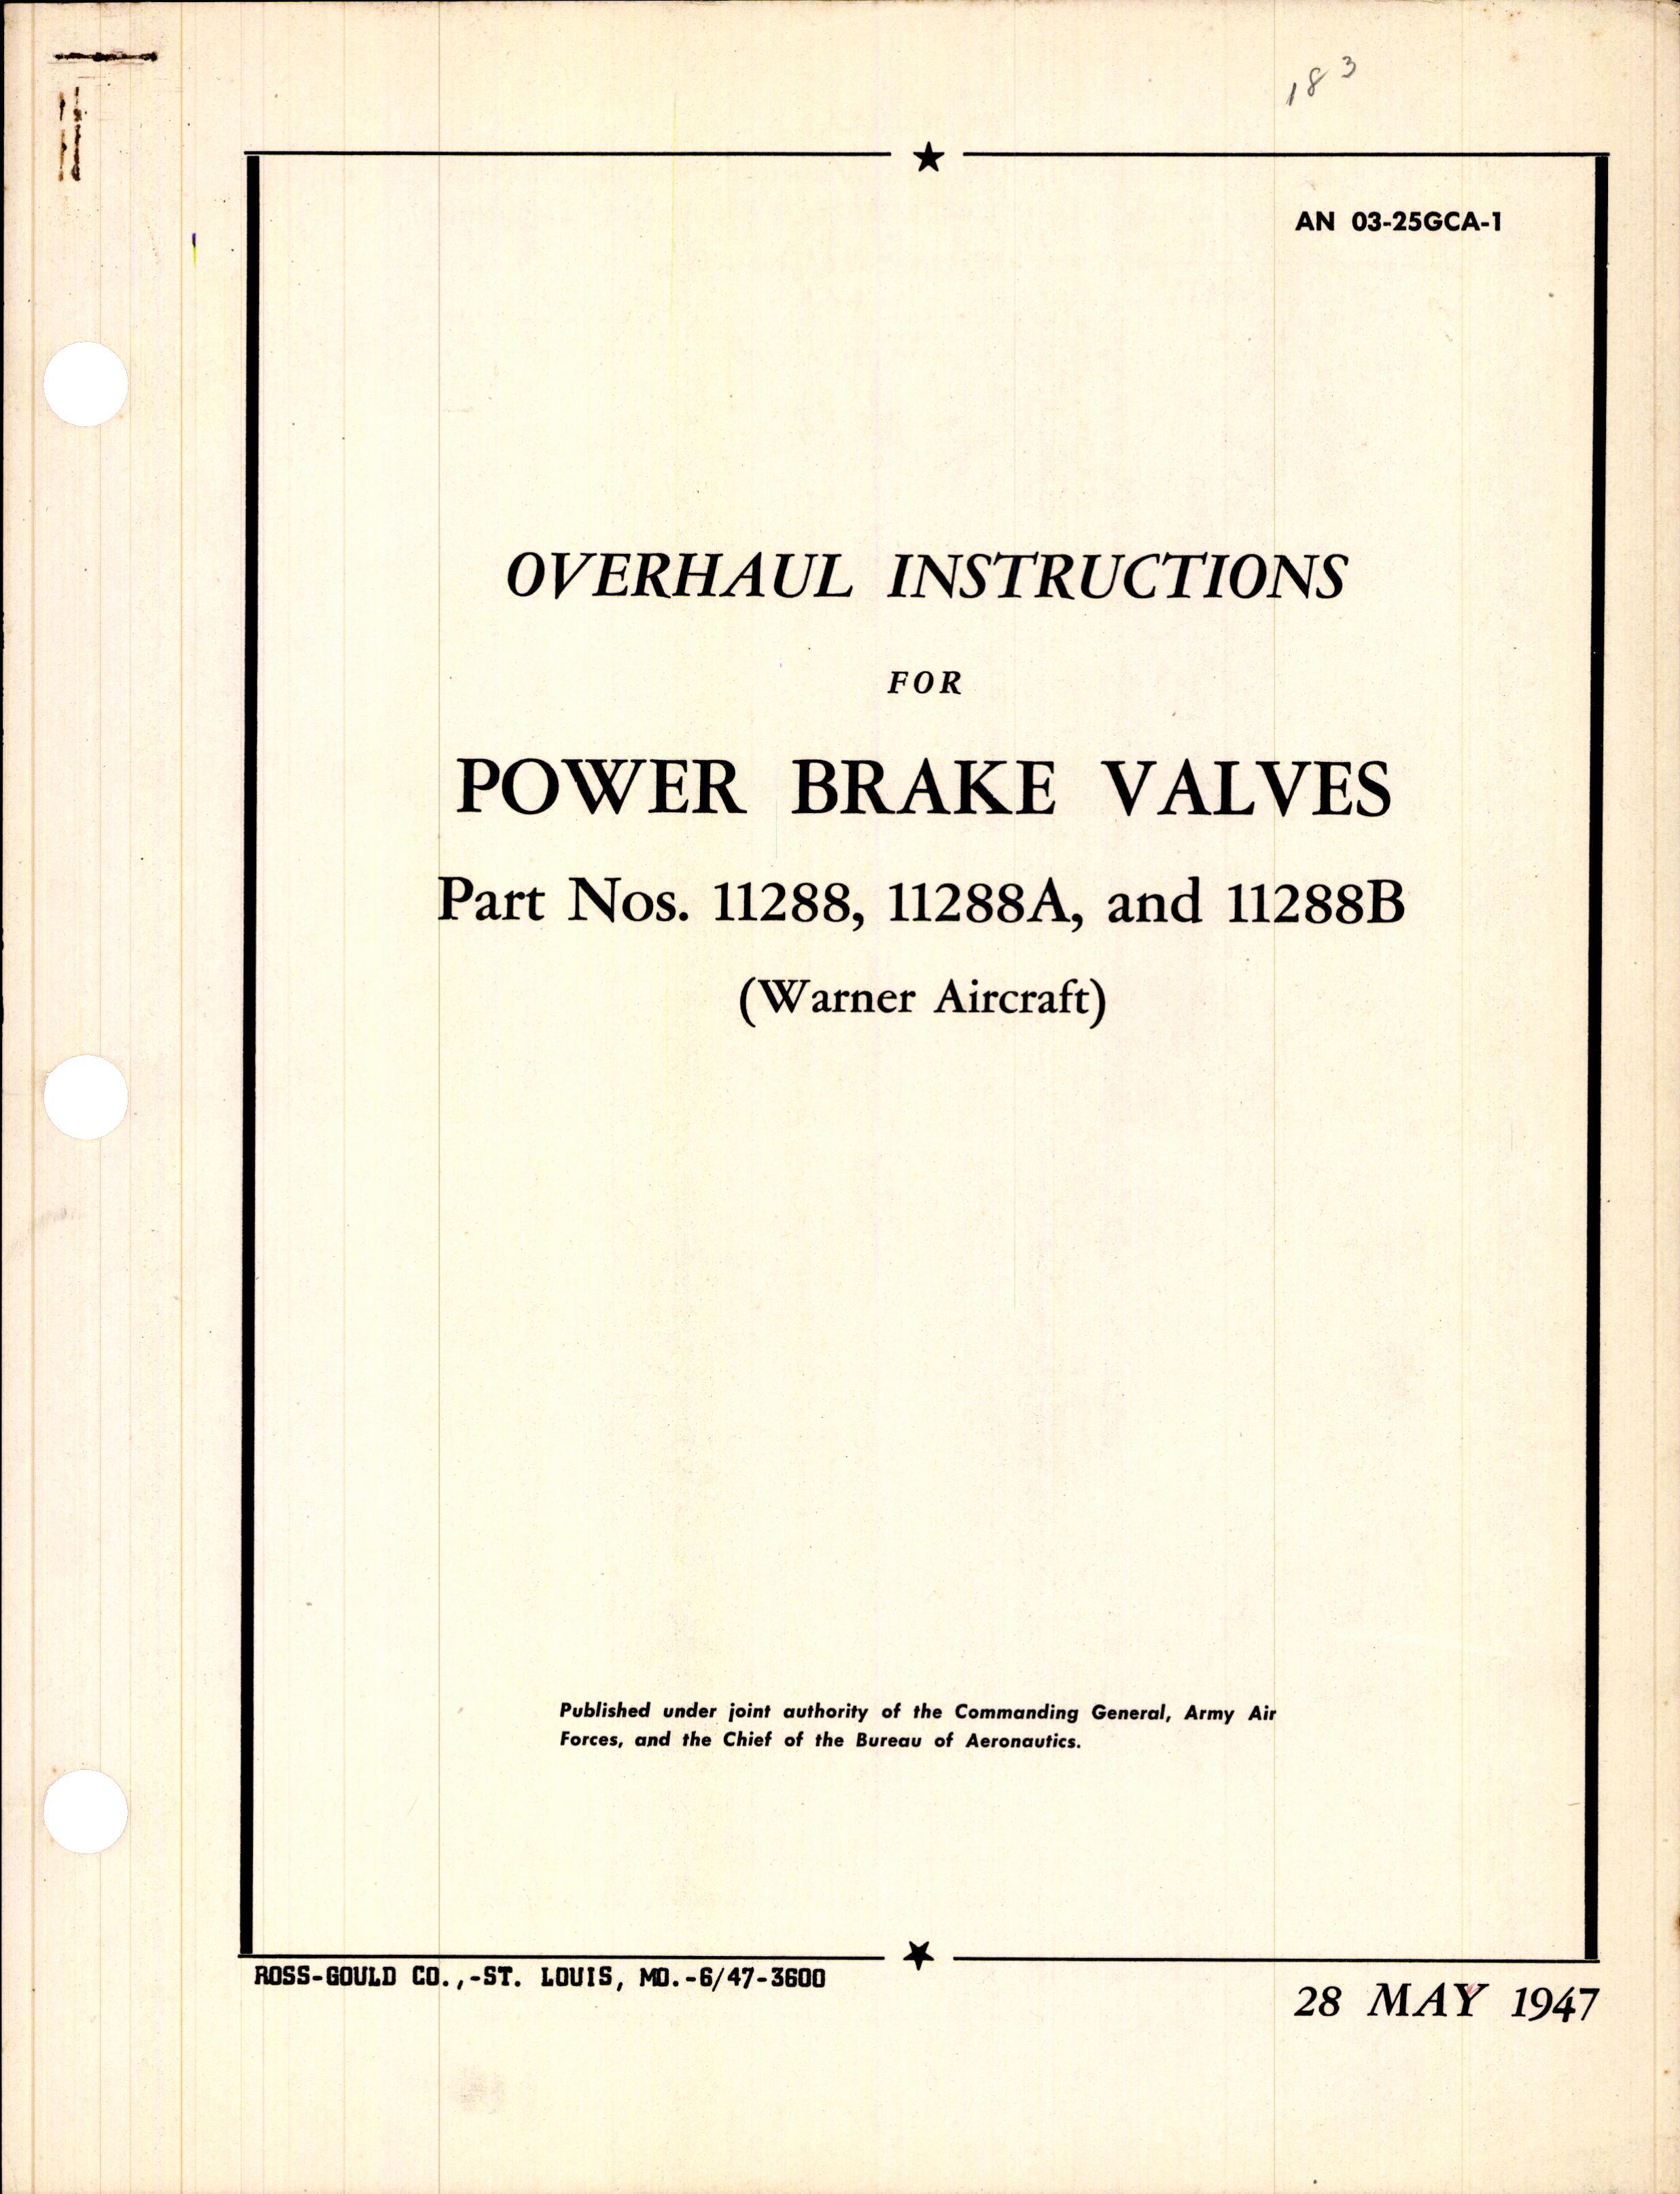 Sample page 1 from AirCorps Library document: Overhaul Instructions for Power Brake Valves